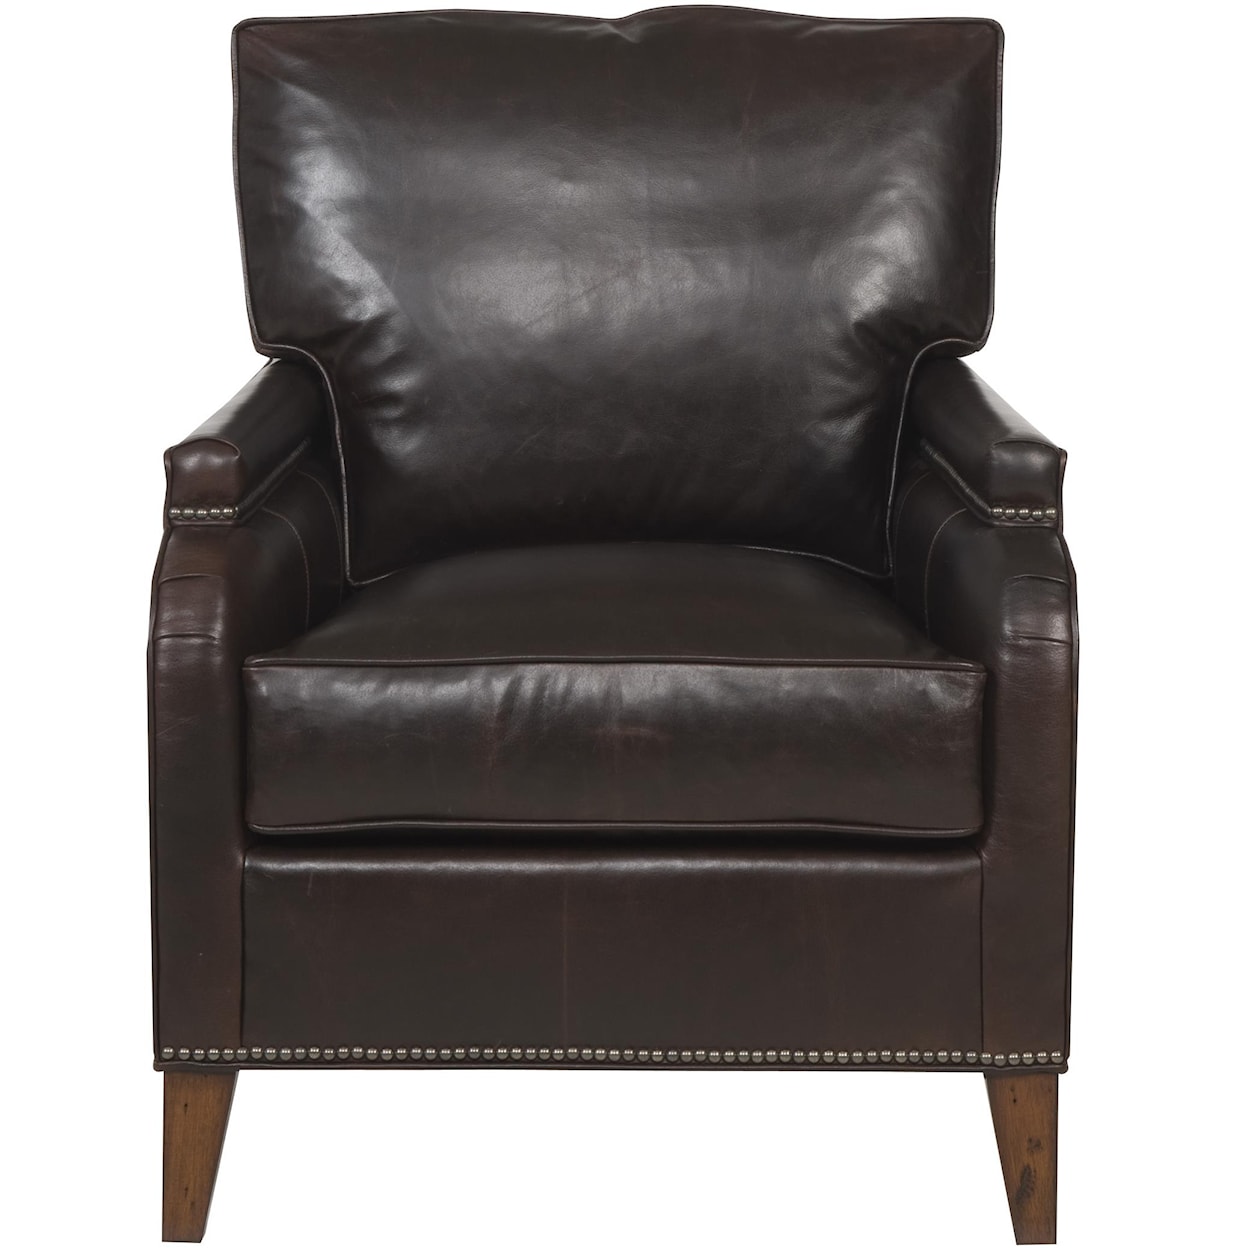 Vanguard Furniture Ginger Traditional Chair